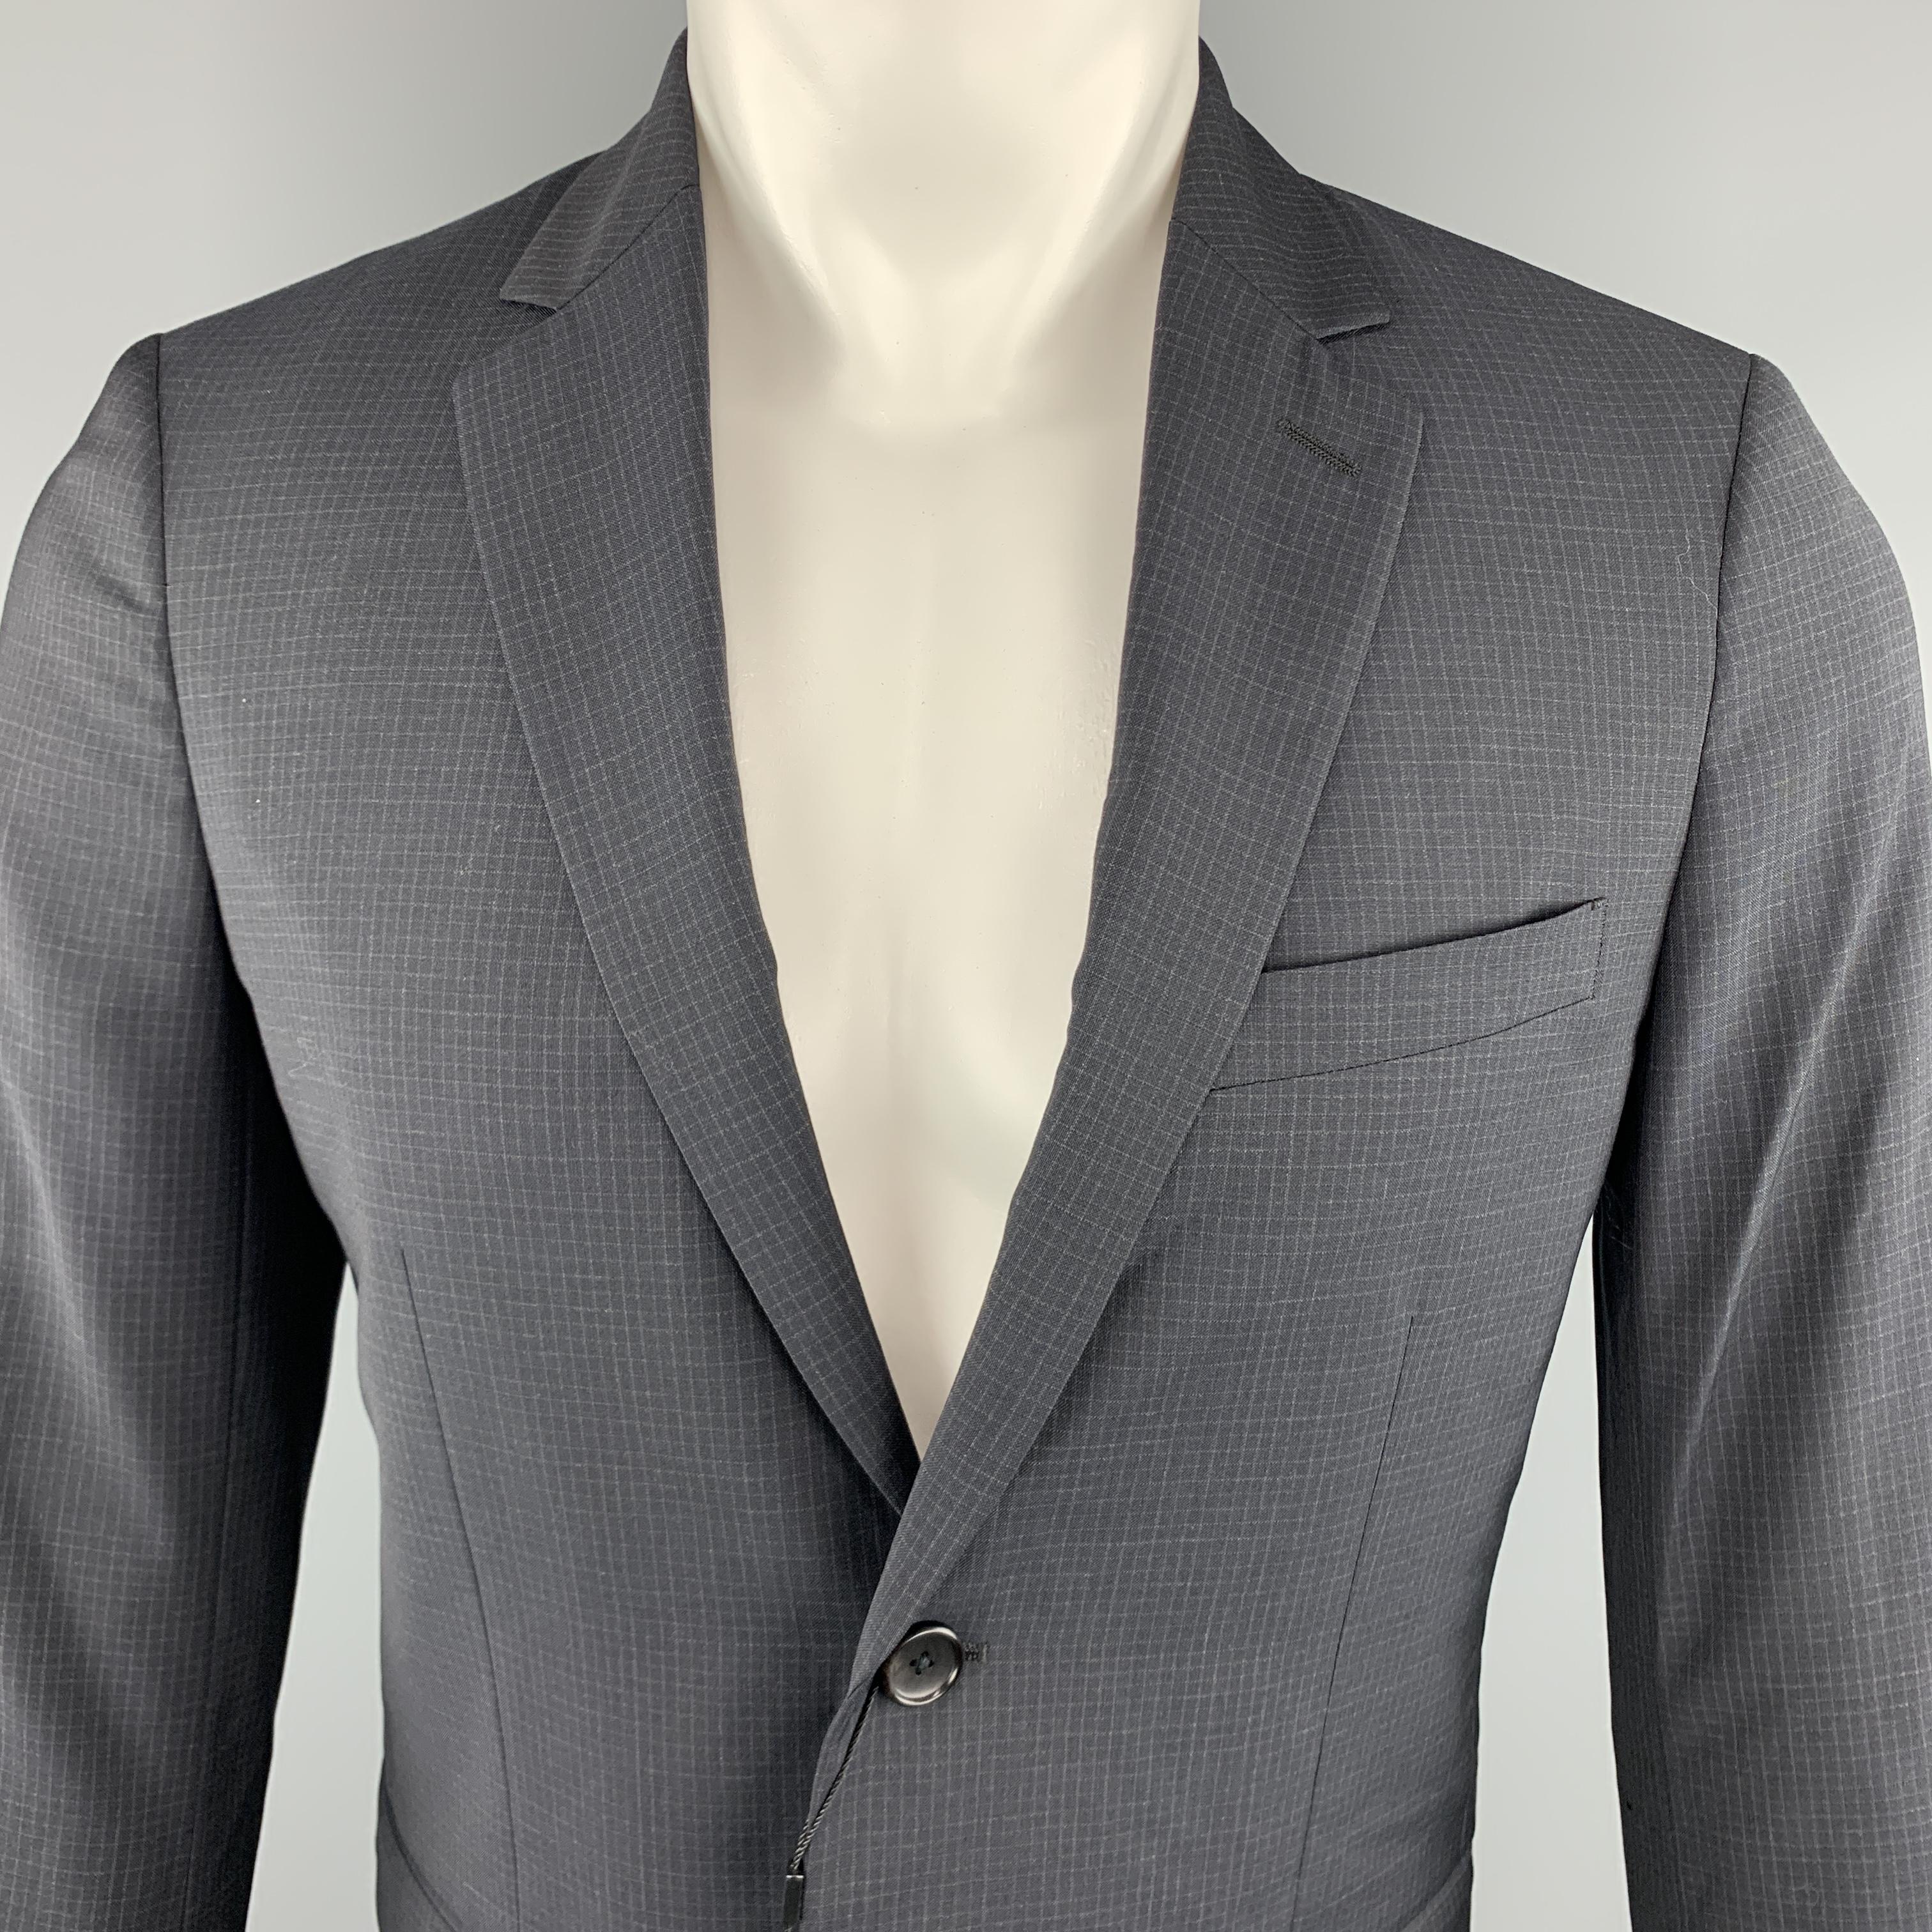 THEORY Wellar Sport Coat comes in a navy tone in a grid wool material, with a notch lapel, slit and flap pockets, two buttons at closure, single breasted, buttoned cuffs and a single vent at back.

New With Tags.
Marked: